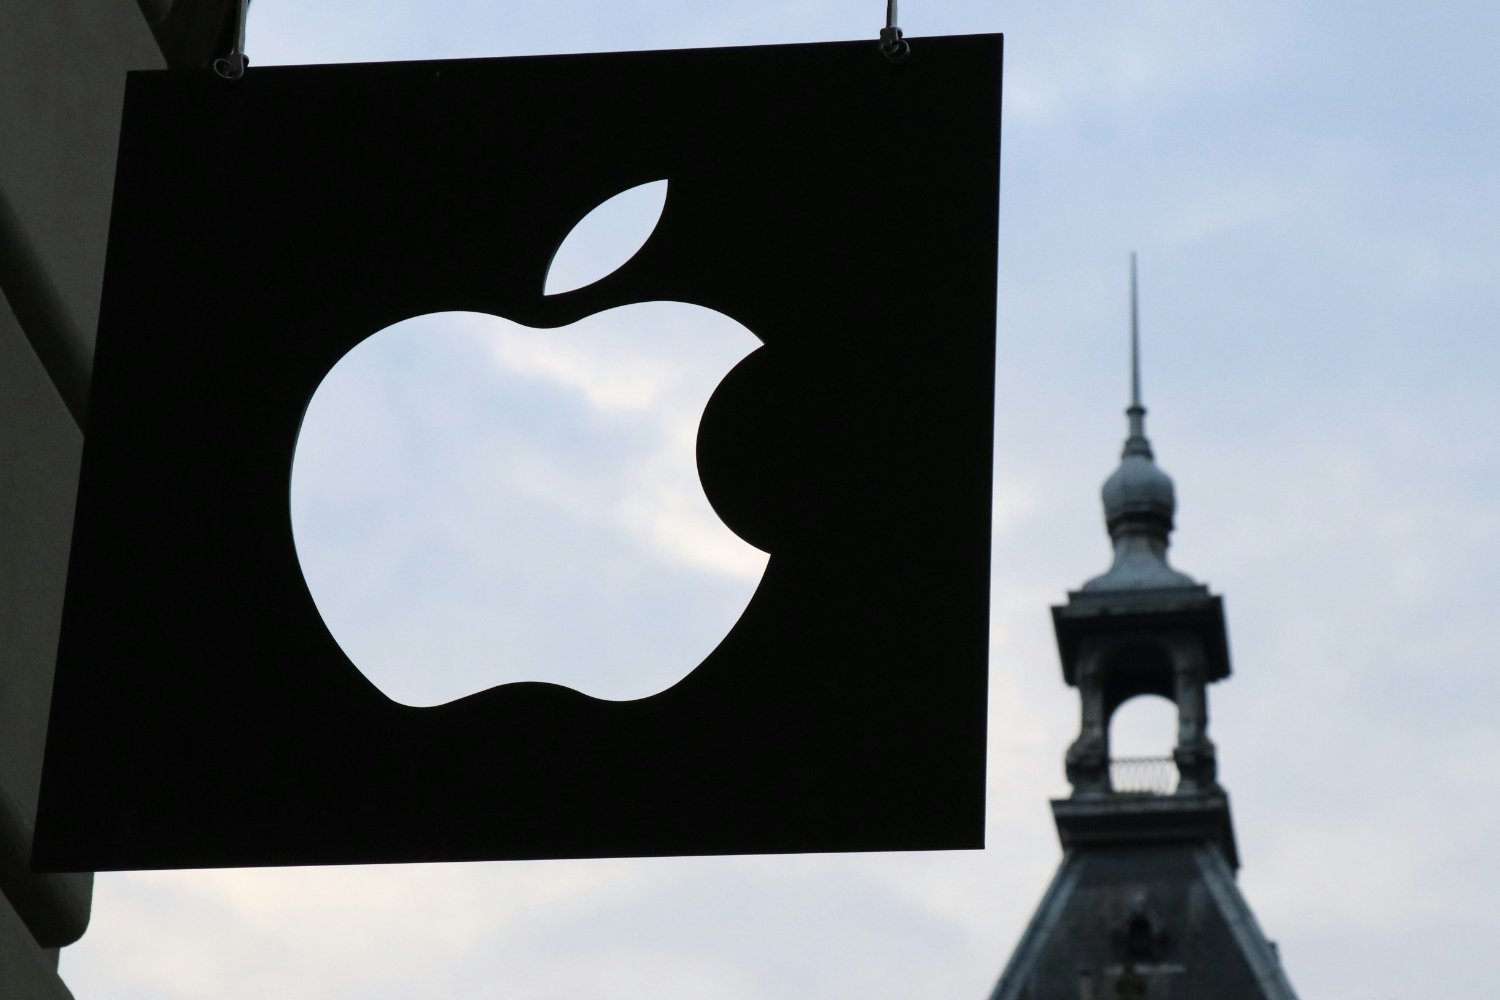 Apple slows down the opening of web browsers in Europe